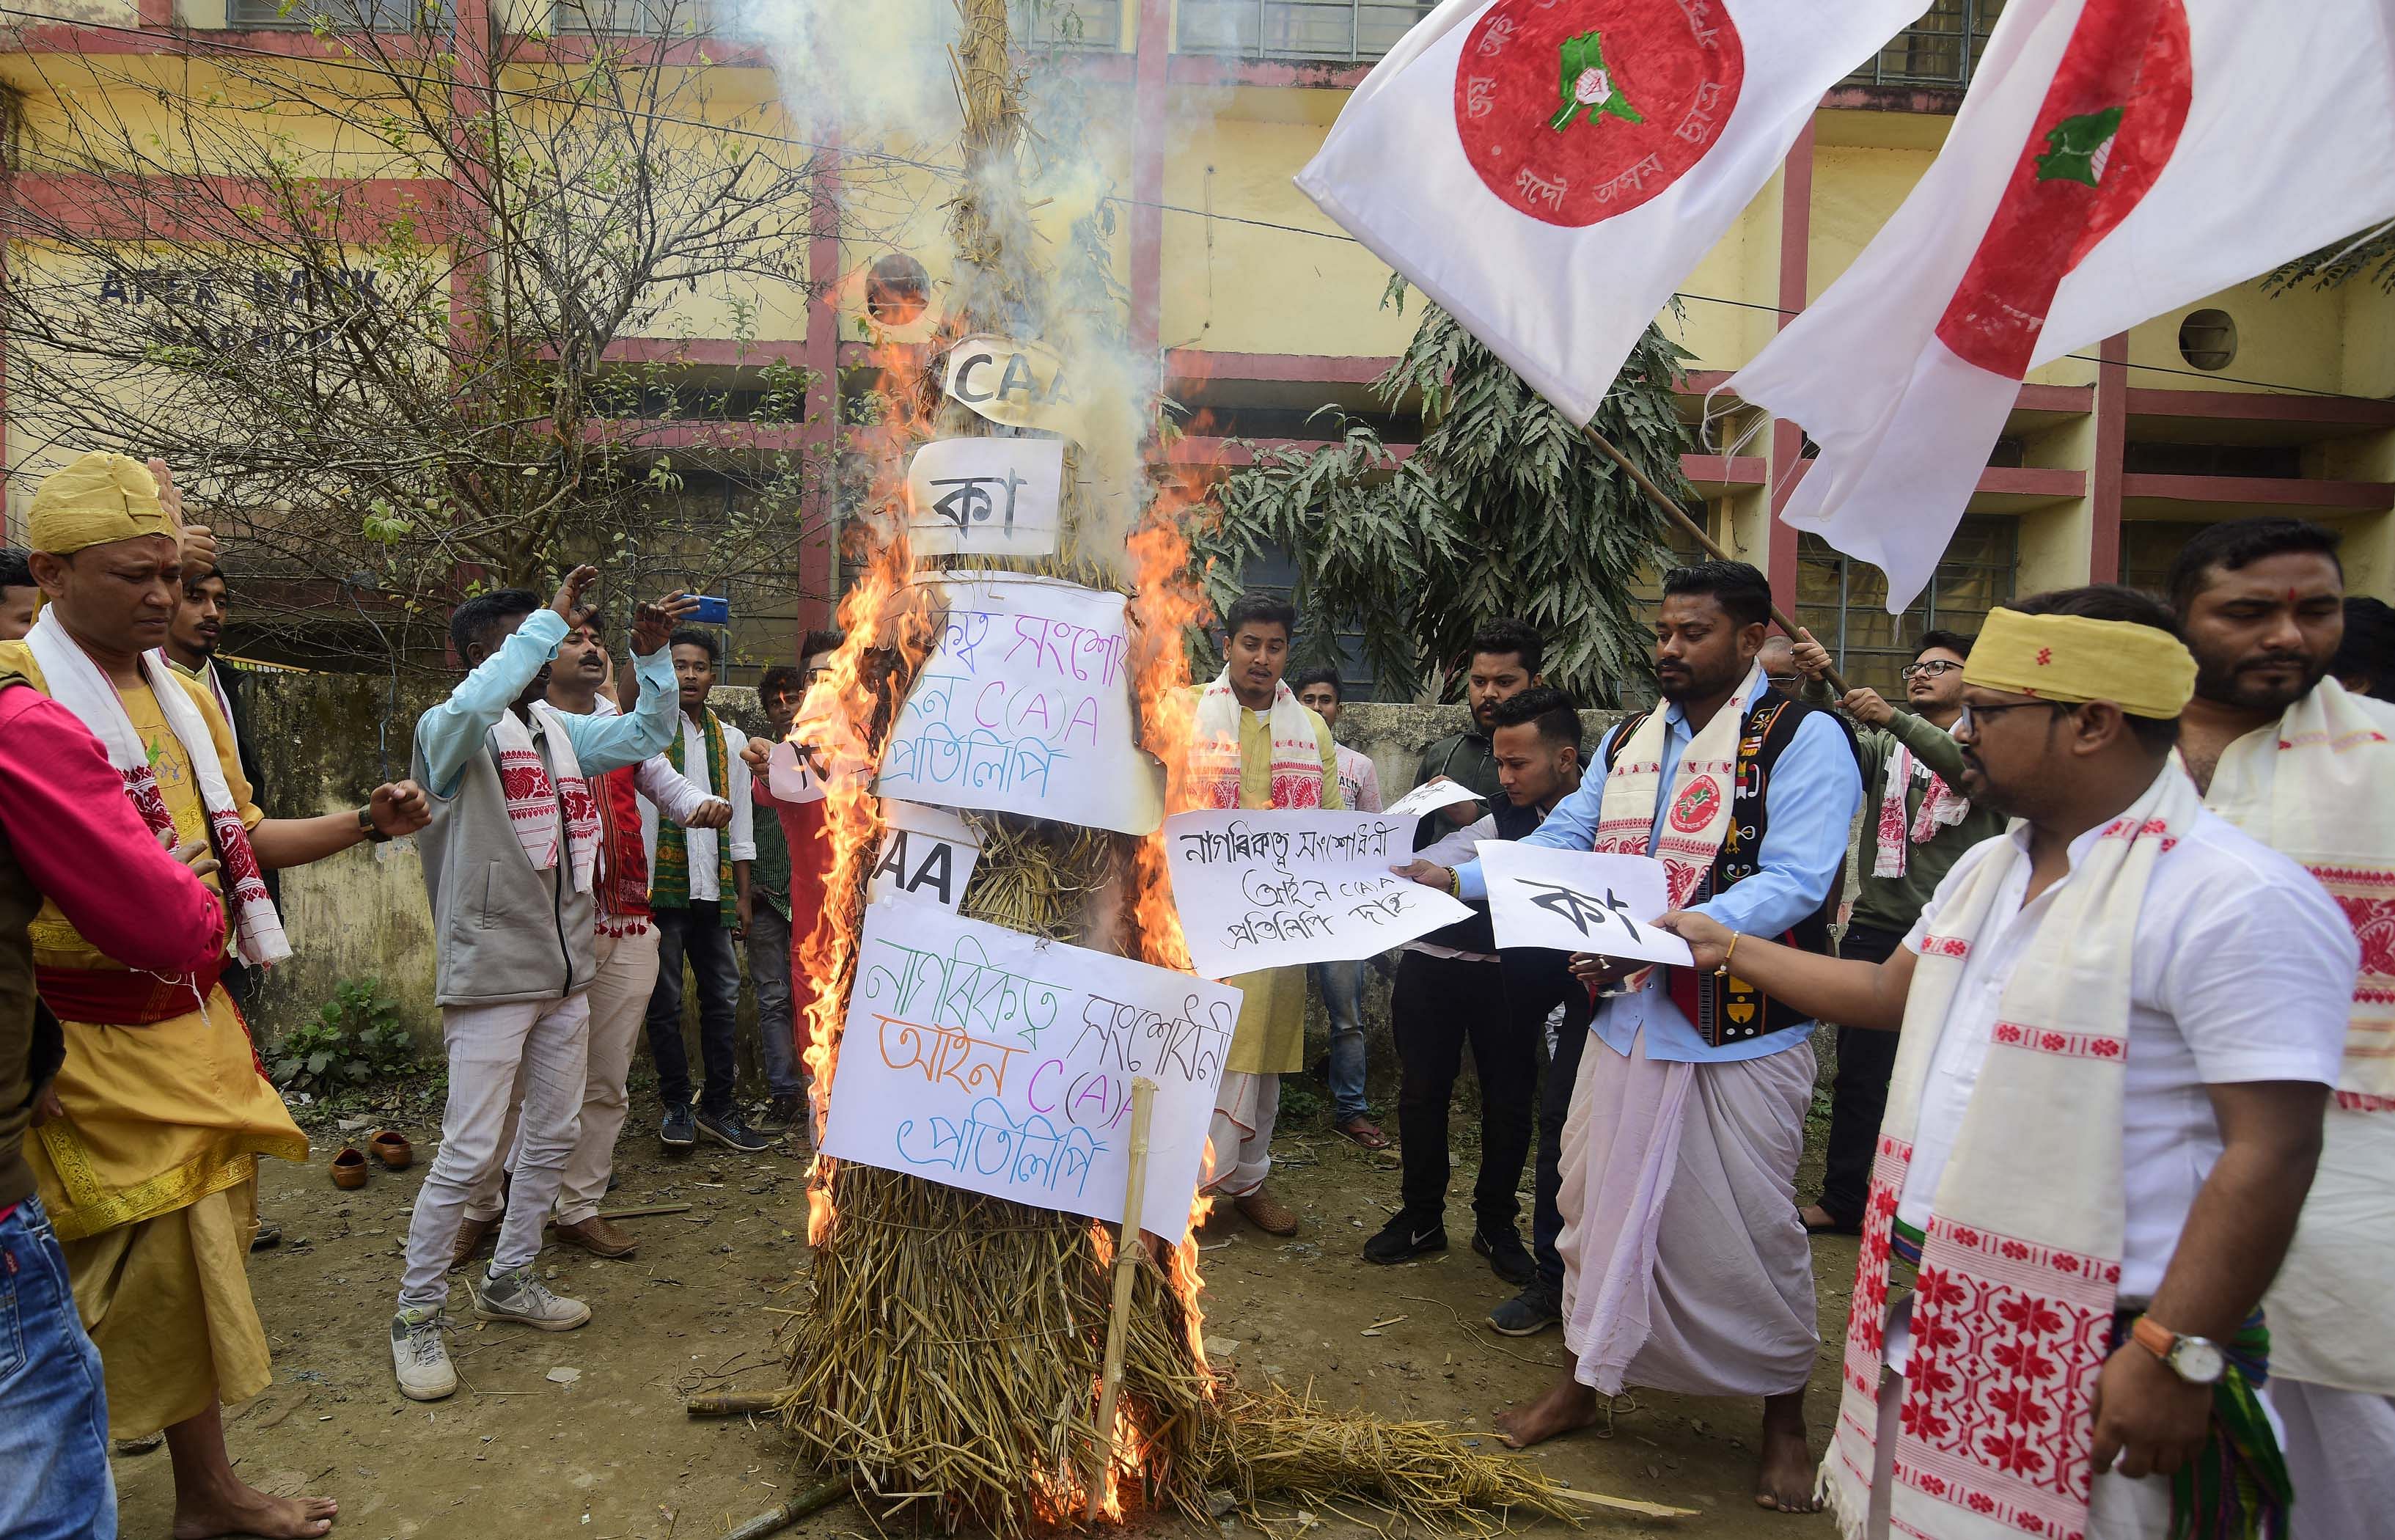  Members of All Assam Students Union burning the copies of Citizenship (Amendment) Act in the fire of Meji, traditional bonfire during Bhogali Bihu celebration in Nagaon district in Assam. (Photo by Anuwar Ali Hazarika)